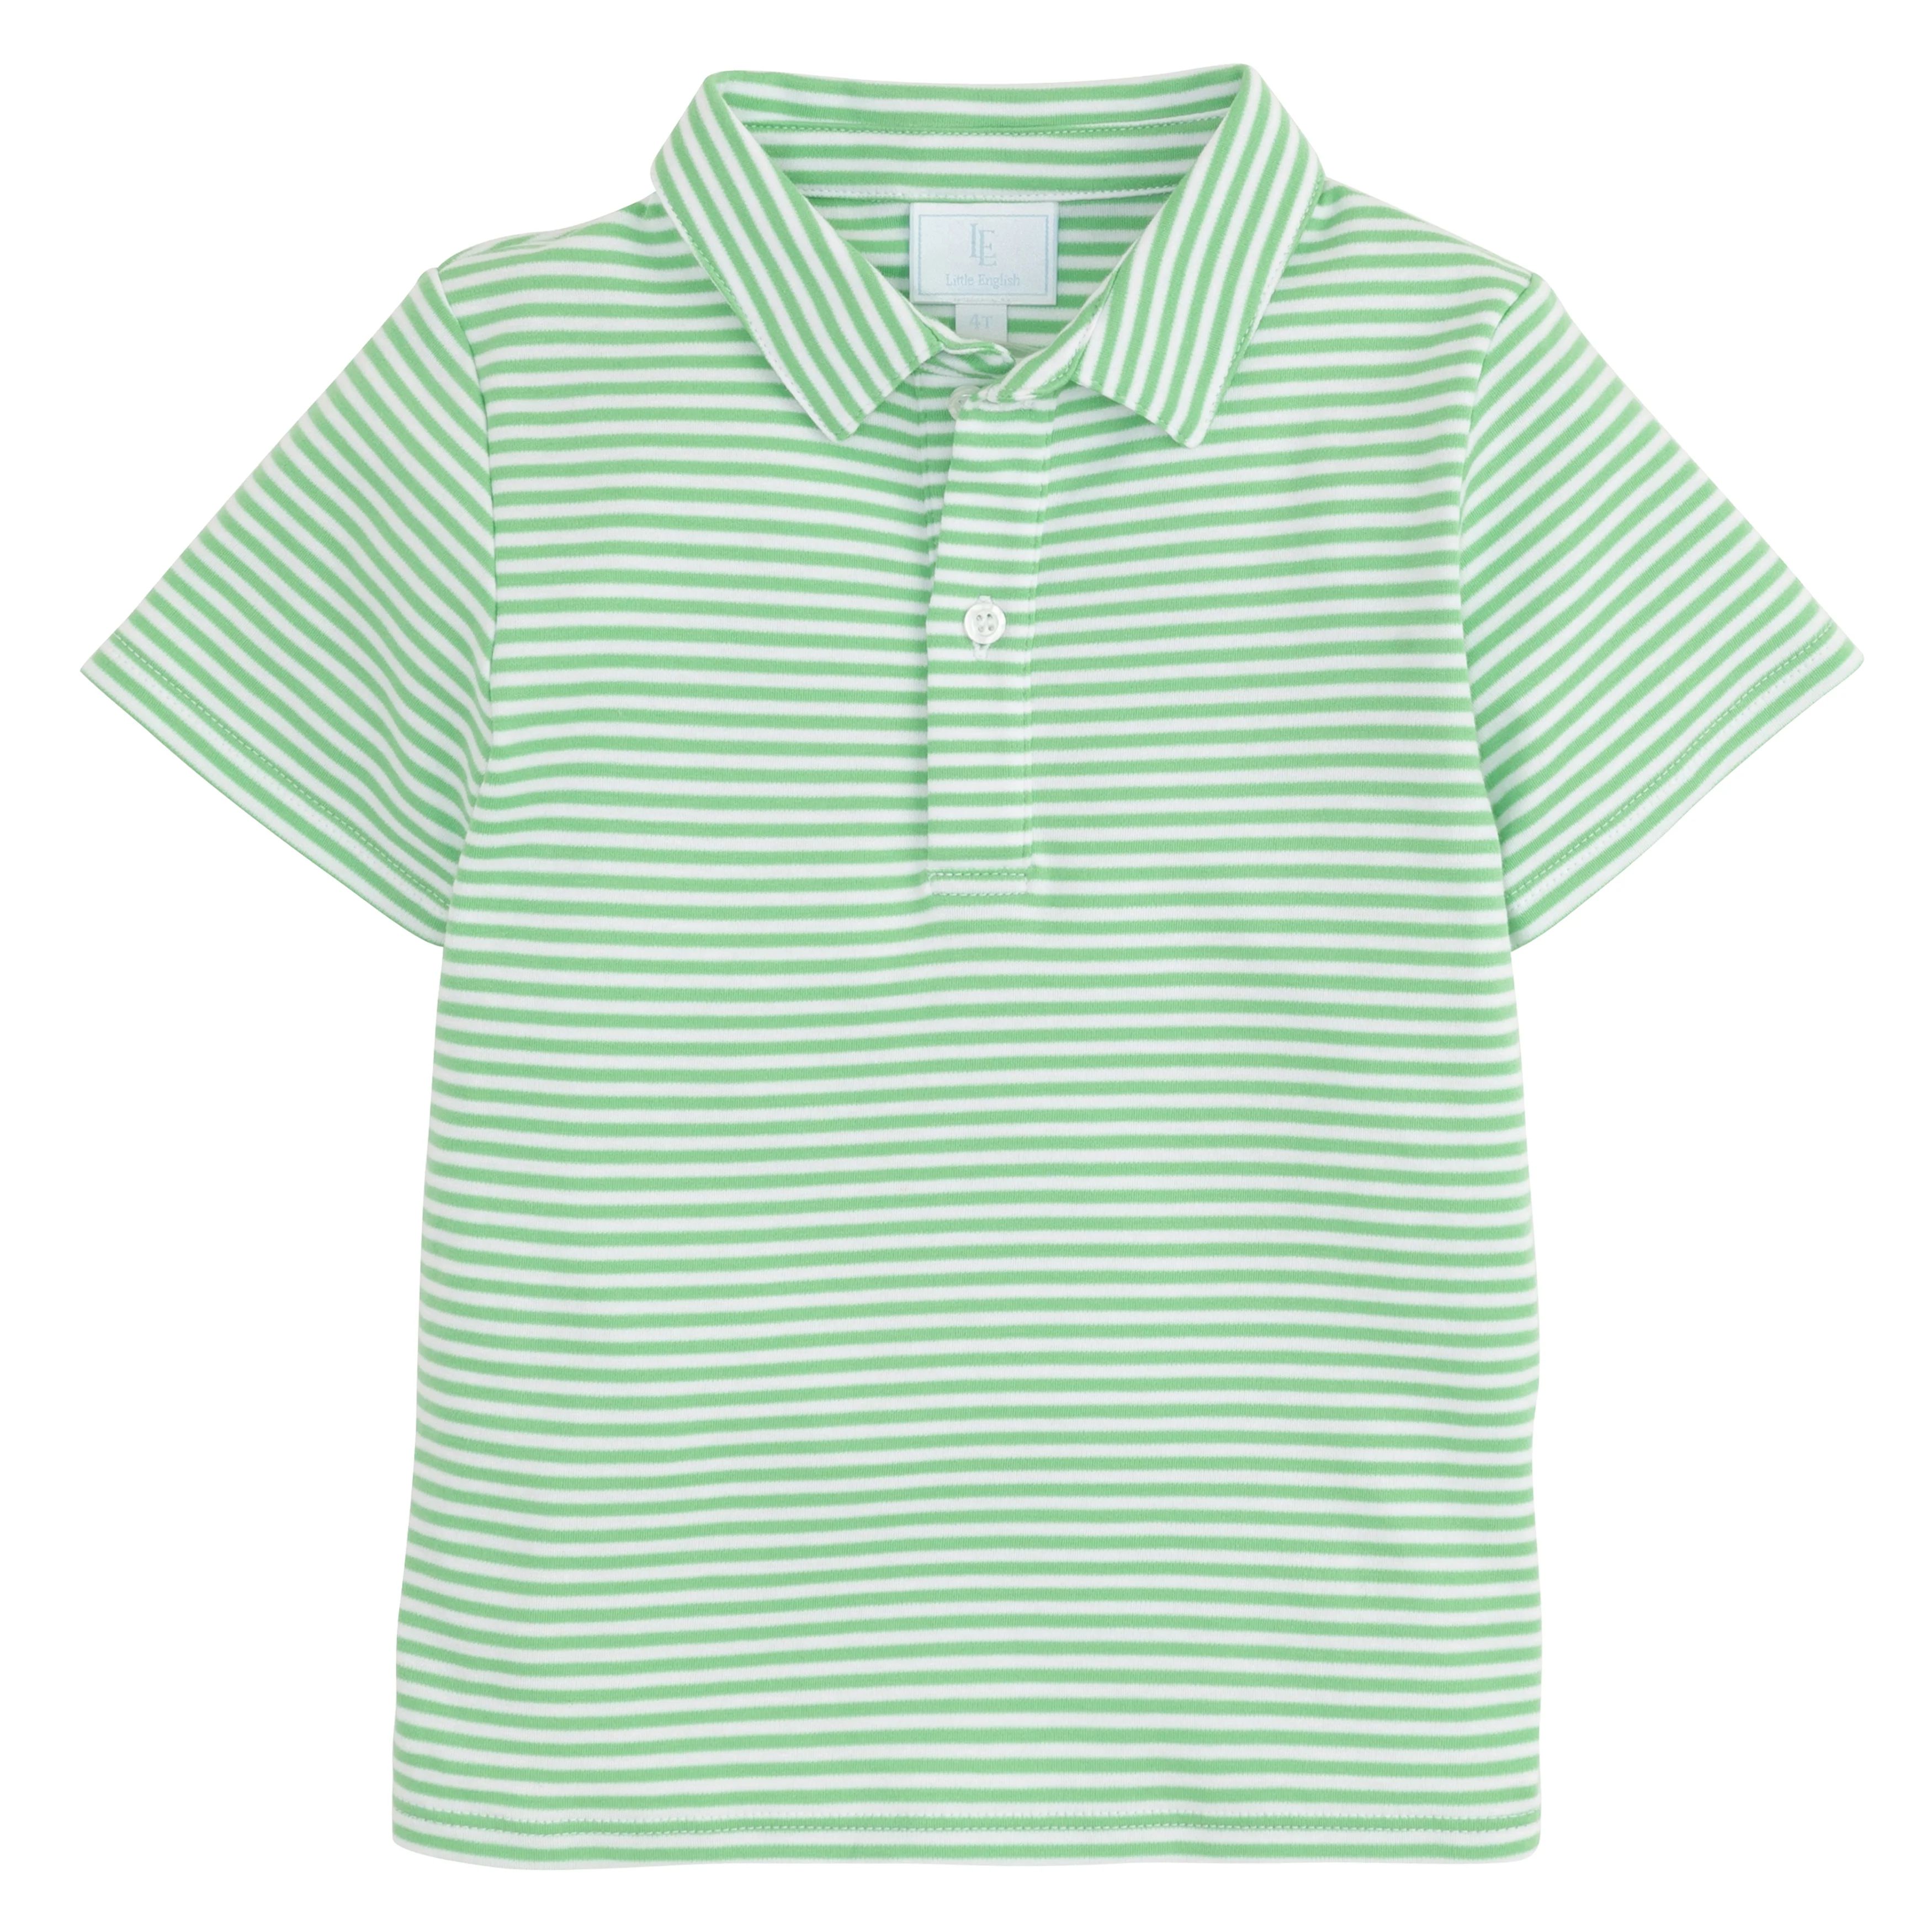 Little Boy's Green Striped Polo - Kids Clothes | Little English